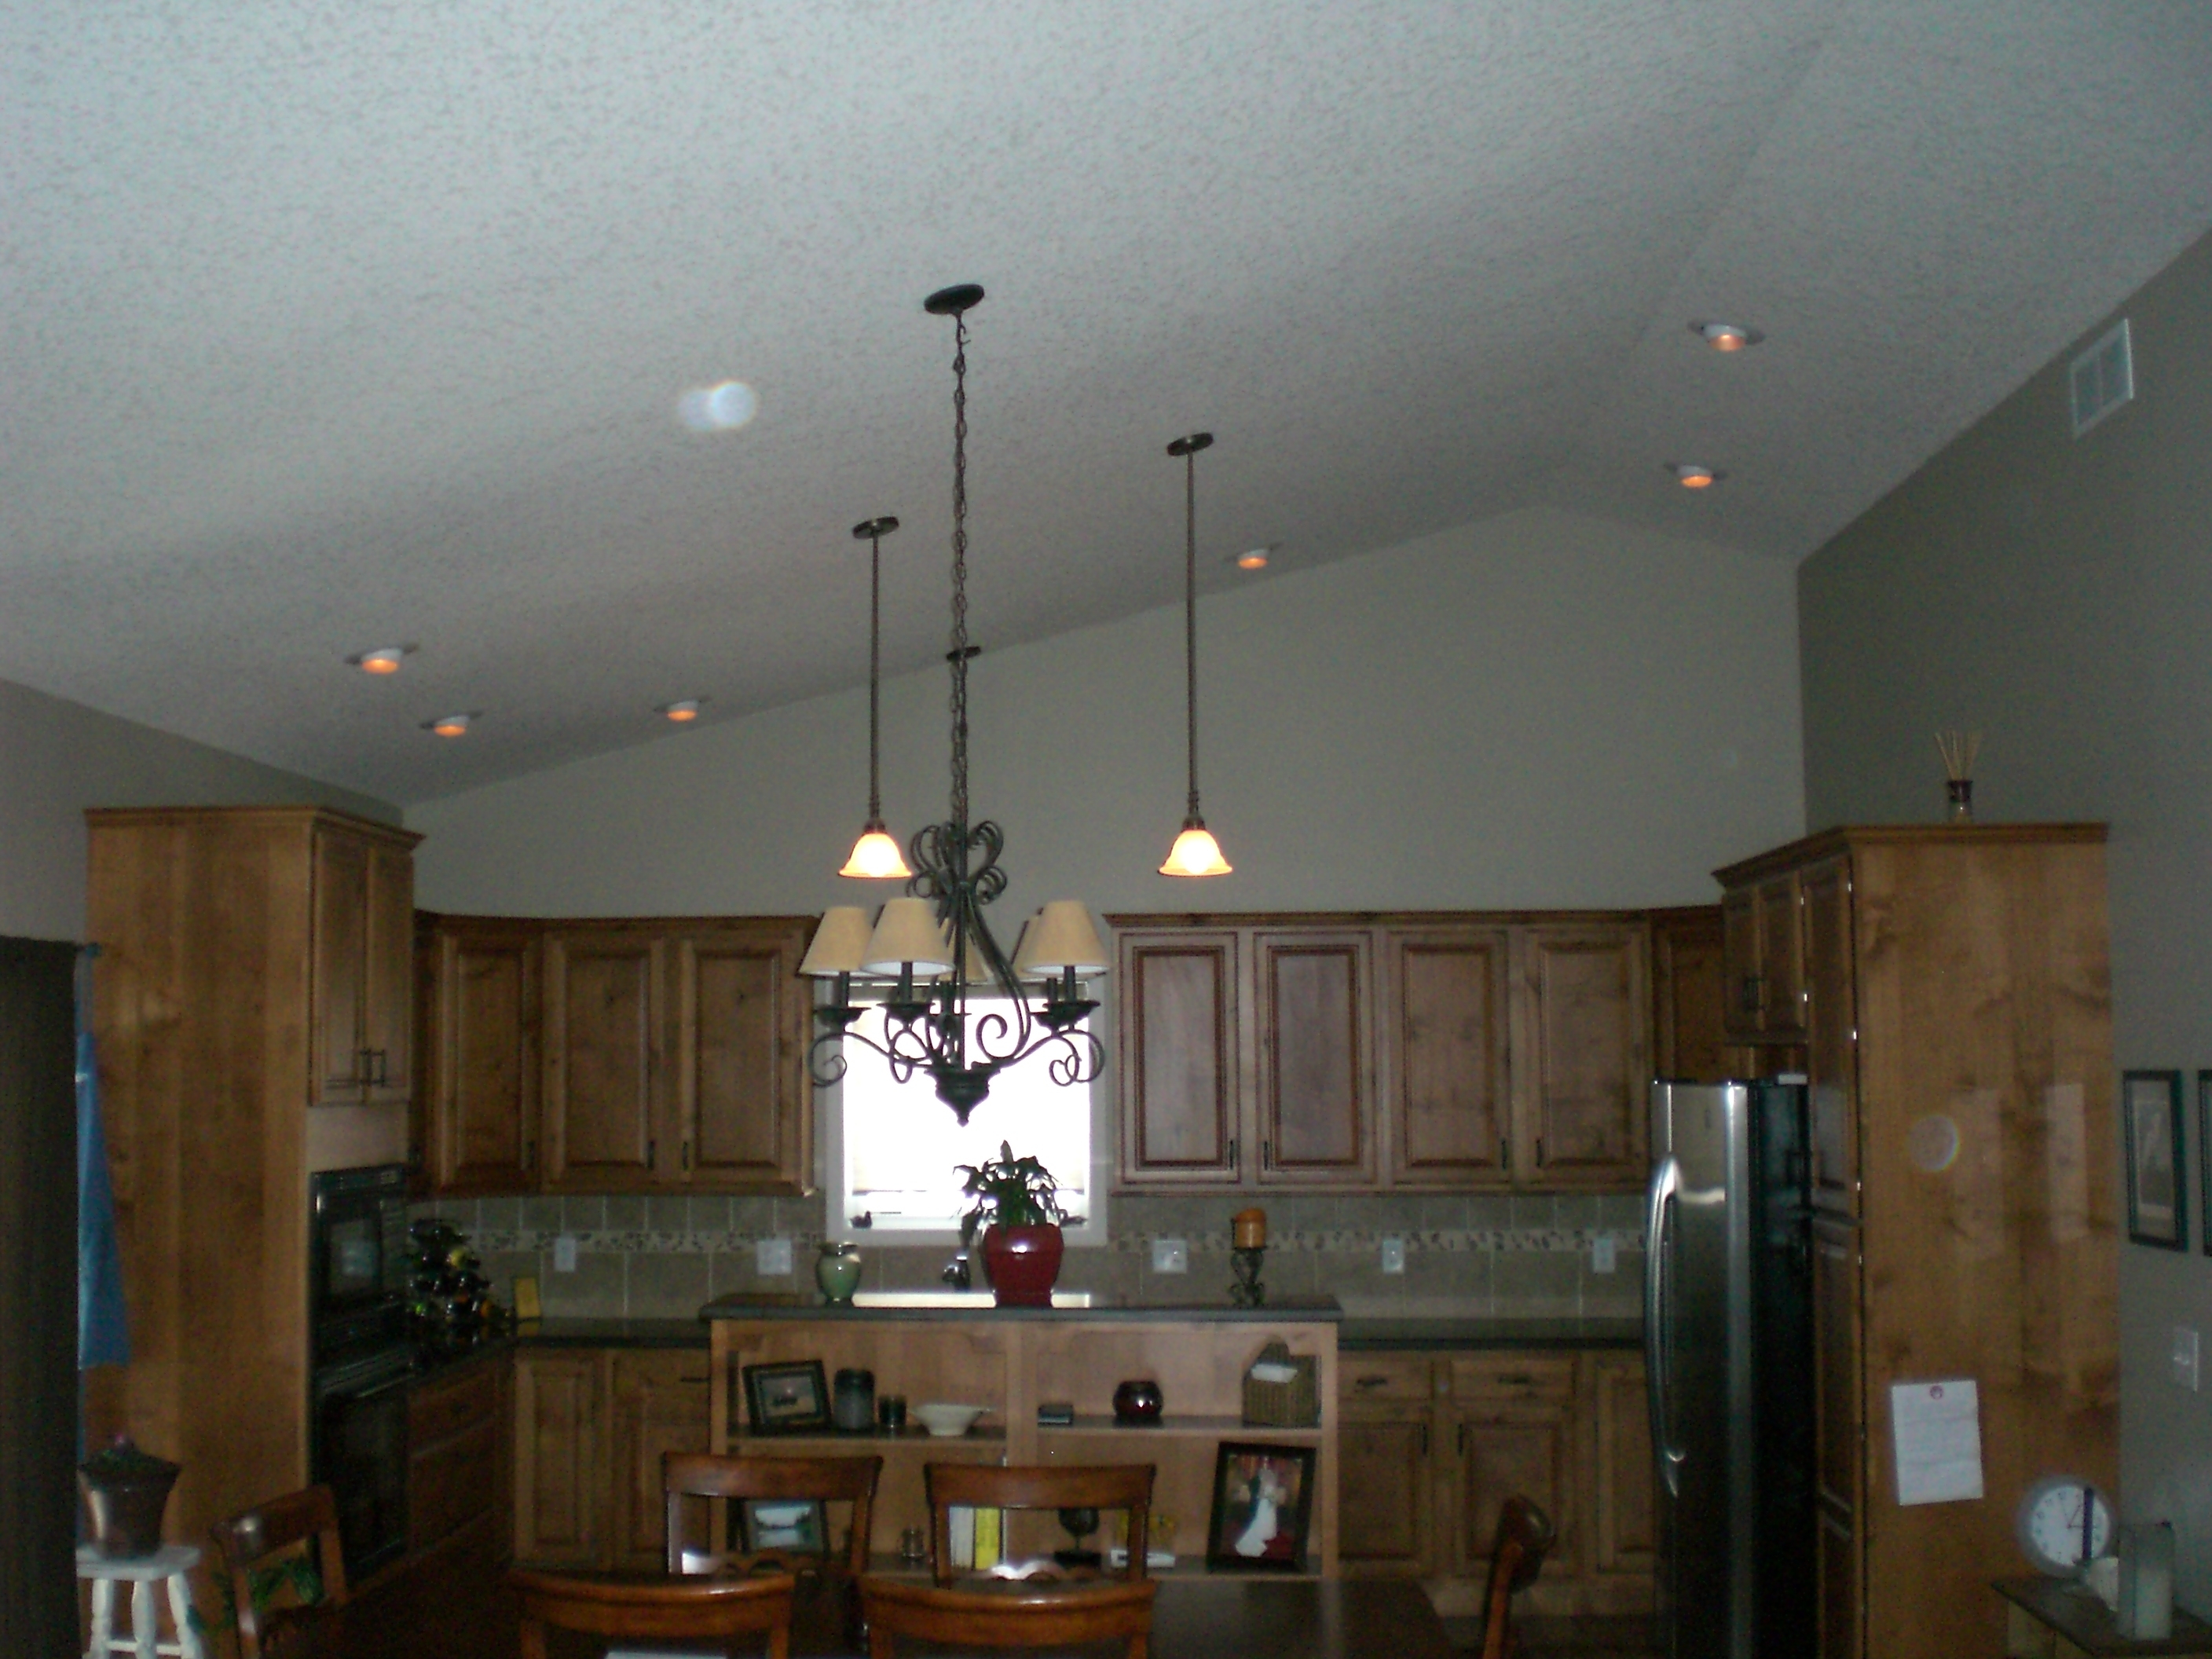 Recessed Lighting For Sloped Ceiling2816 X 2112